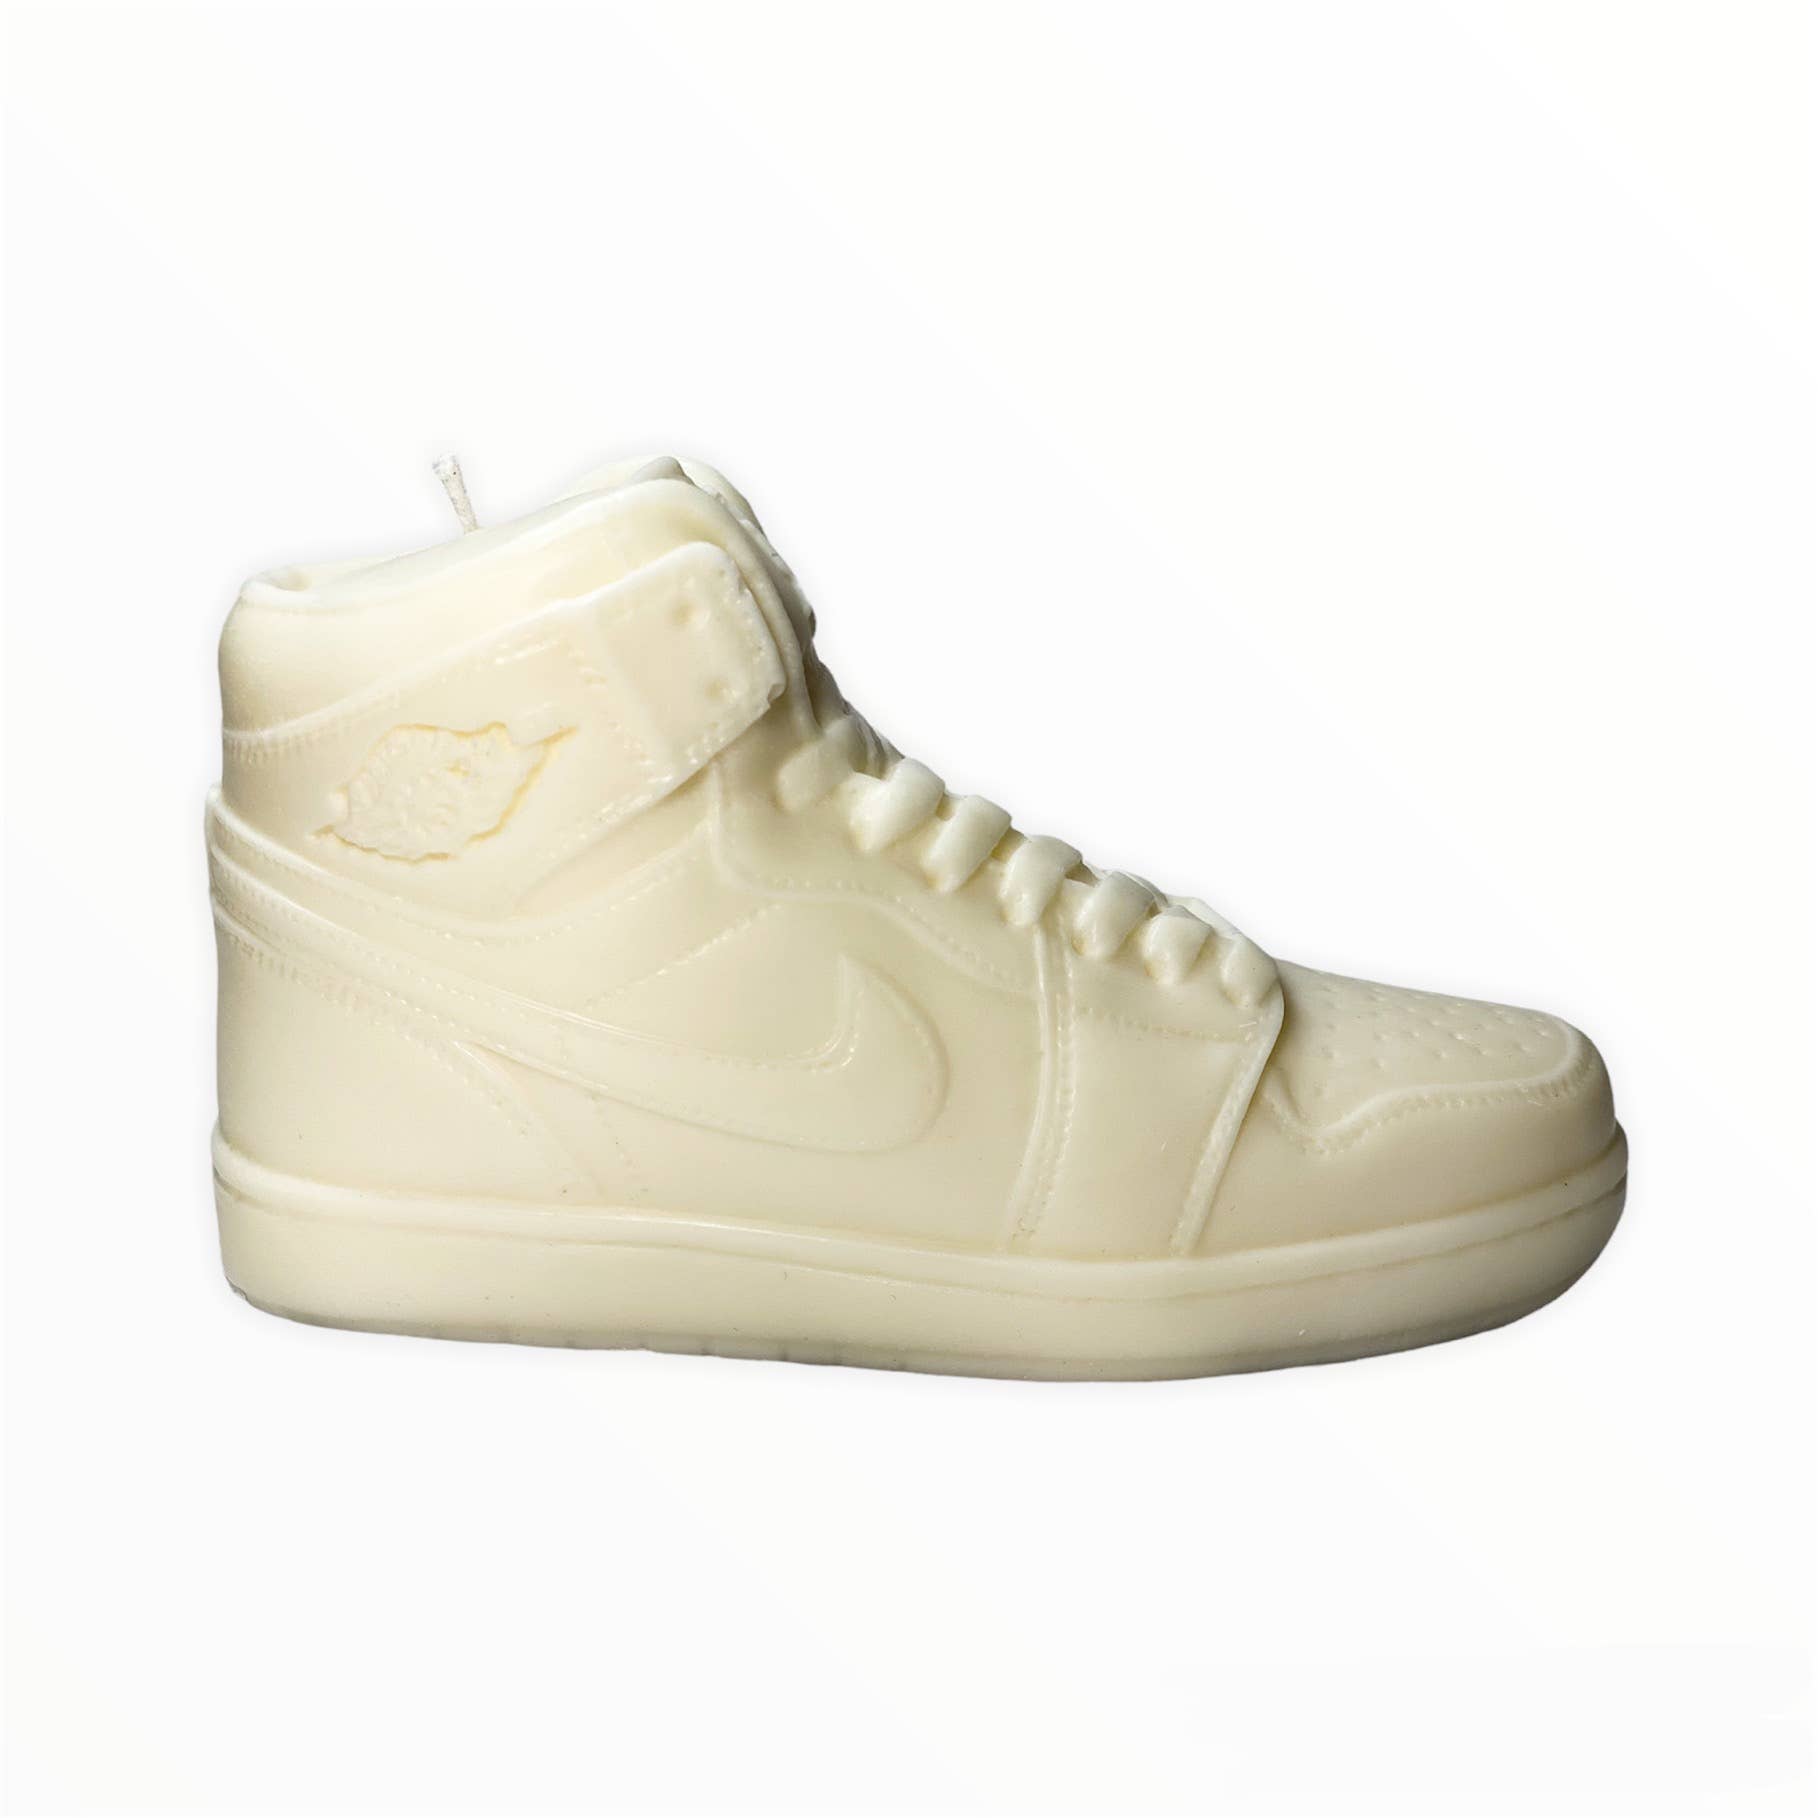 Retro 1 Sneaker Blank Candle